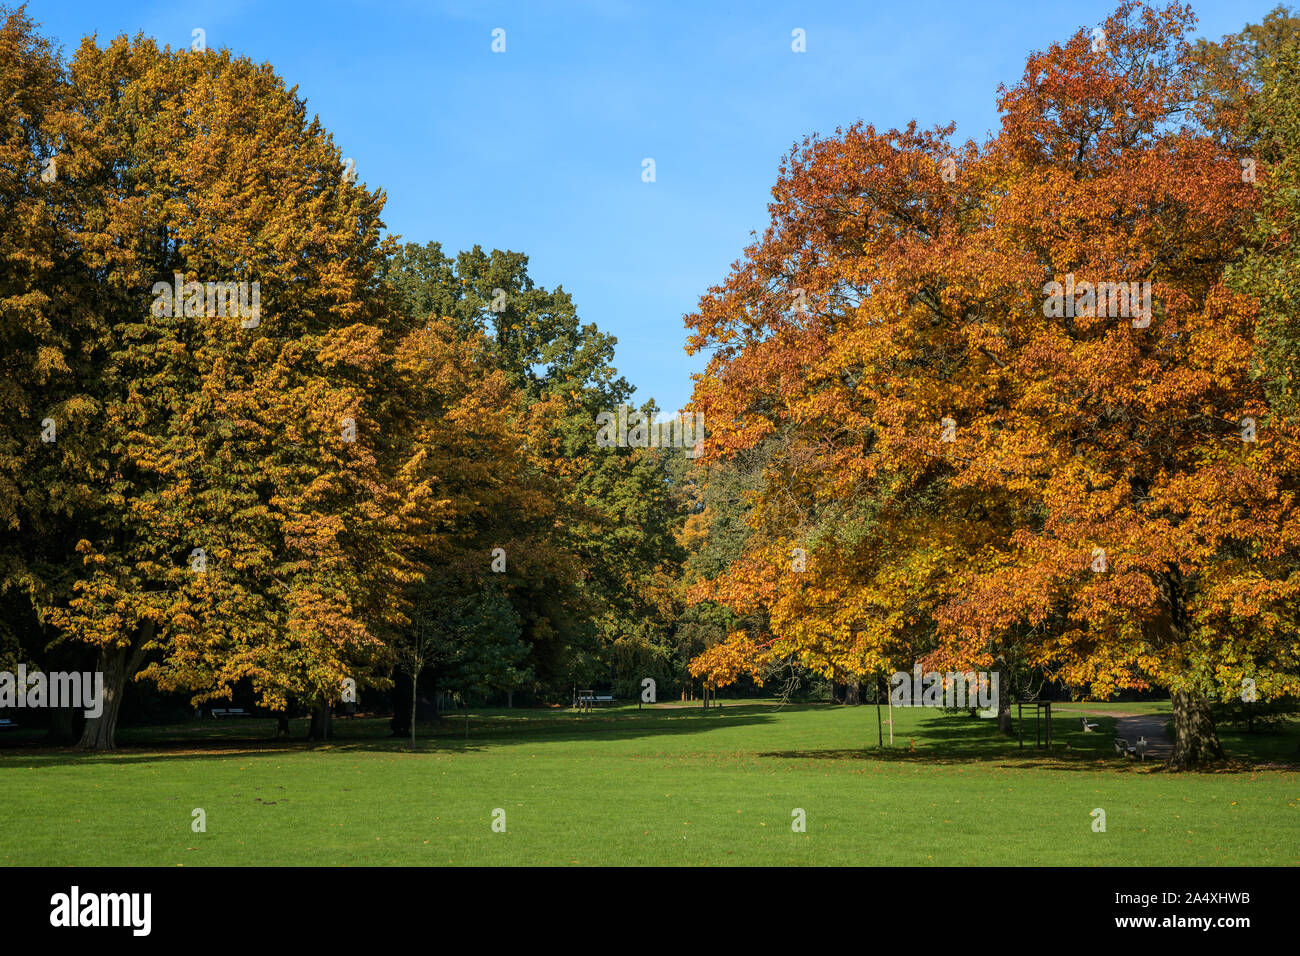 autumn colors on the trees with red and golden foliage in a park, beautiful seasonal landscape, blue sky Stock Photo